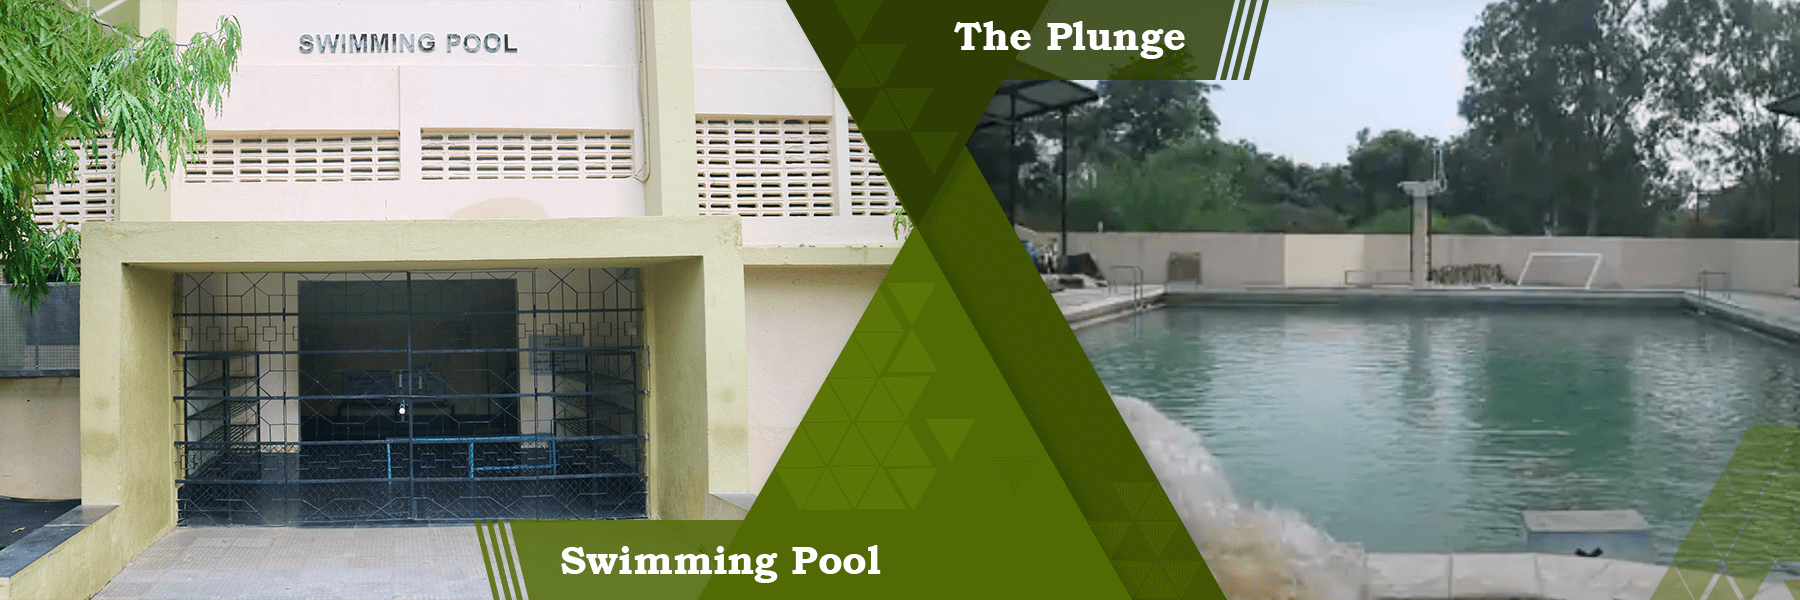 Swimming Pool In Campus_1